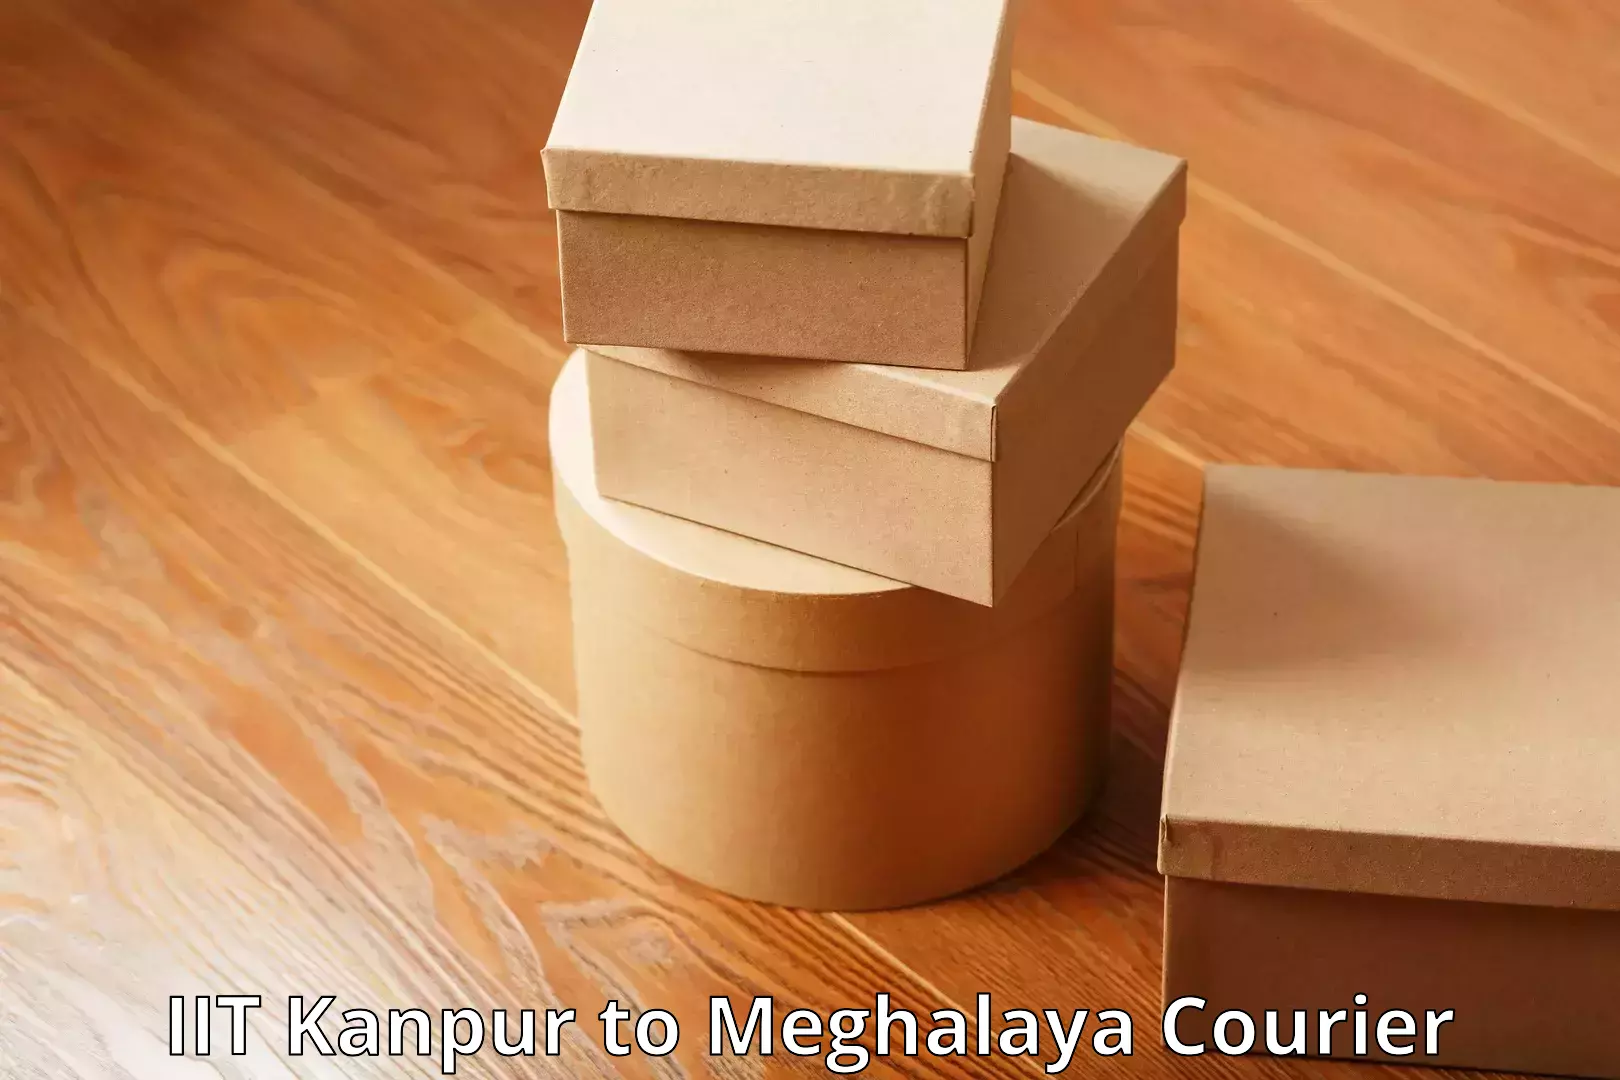 Local baggage delivery in IIT Kanpur to Meghalaya